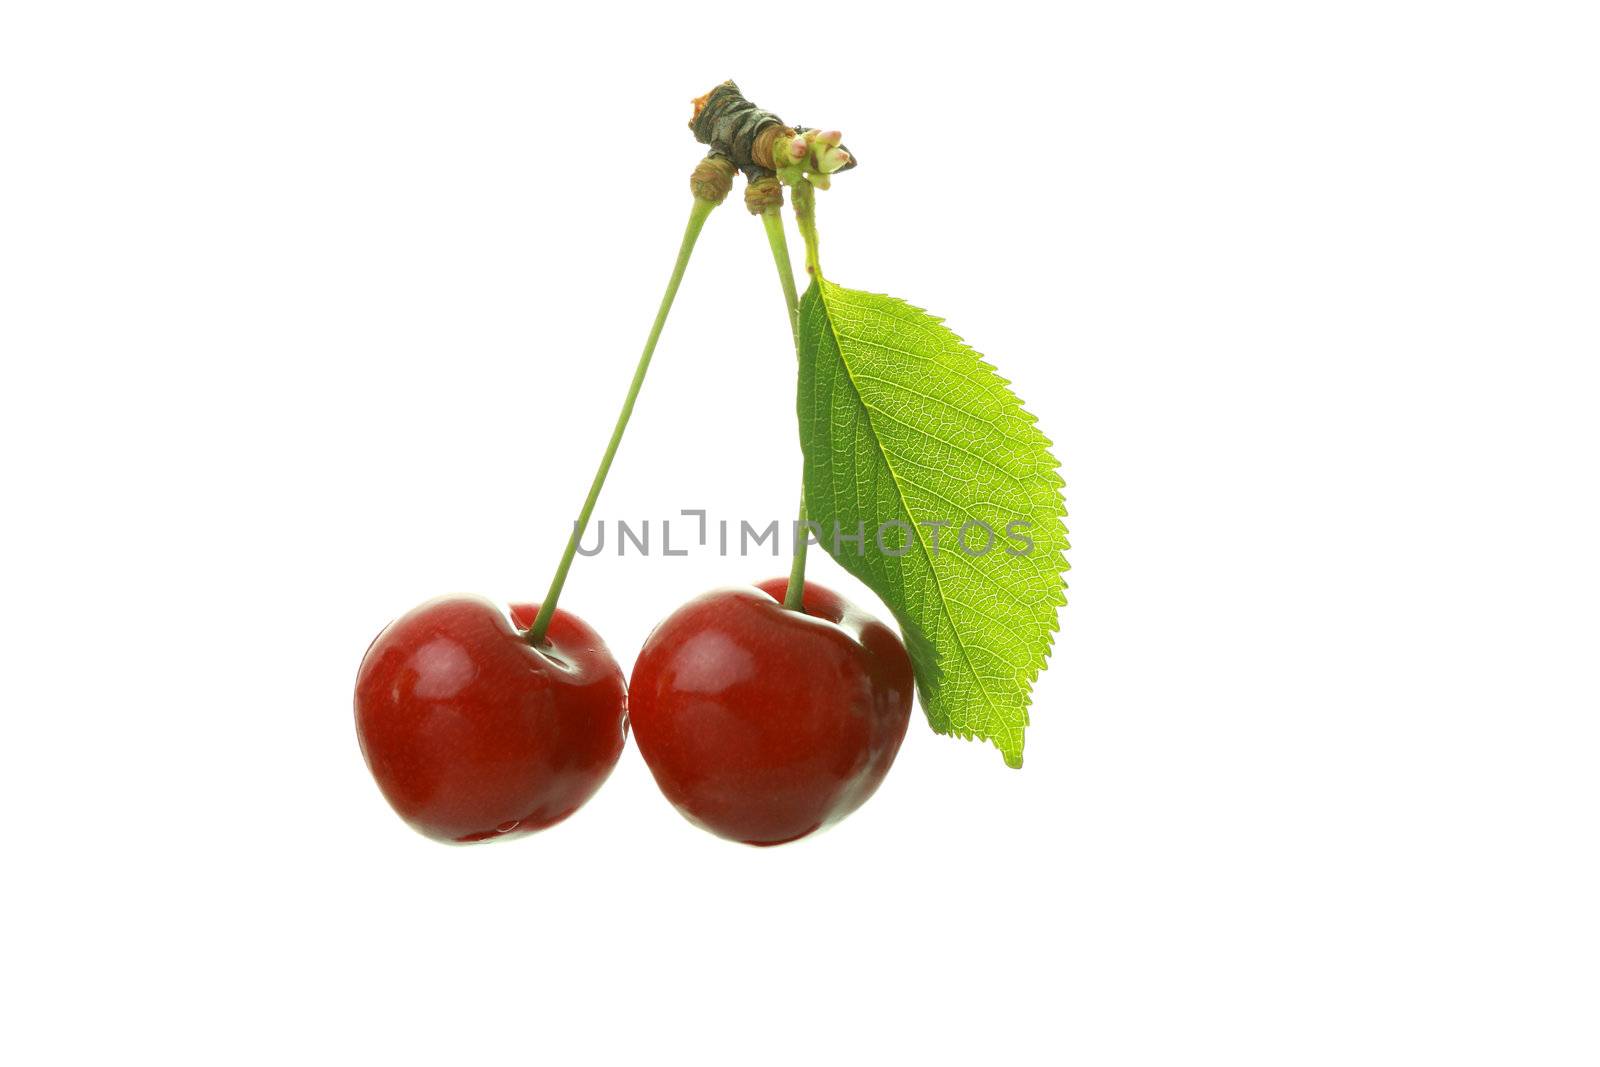 Two cherries isolated on white background